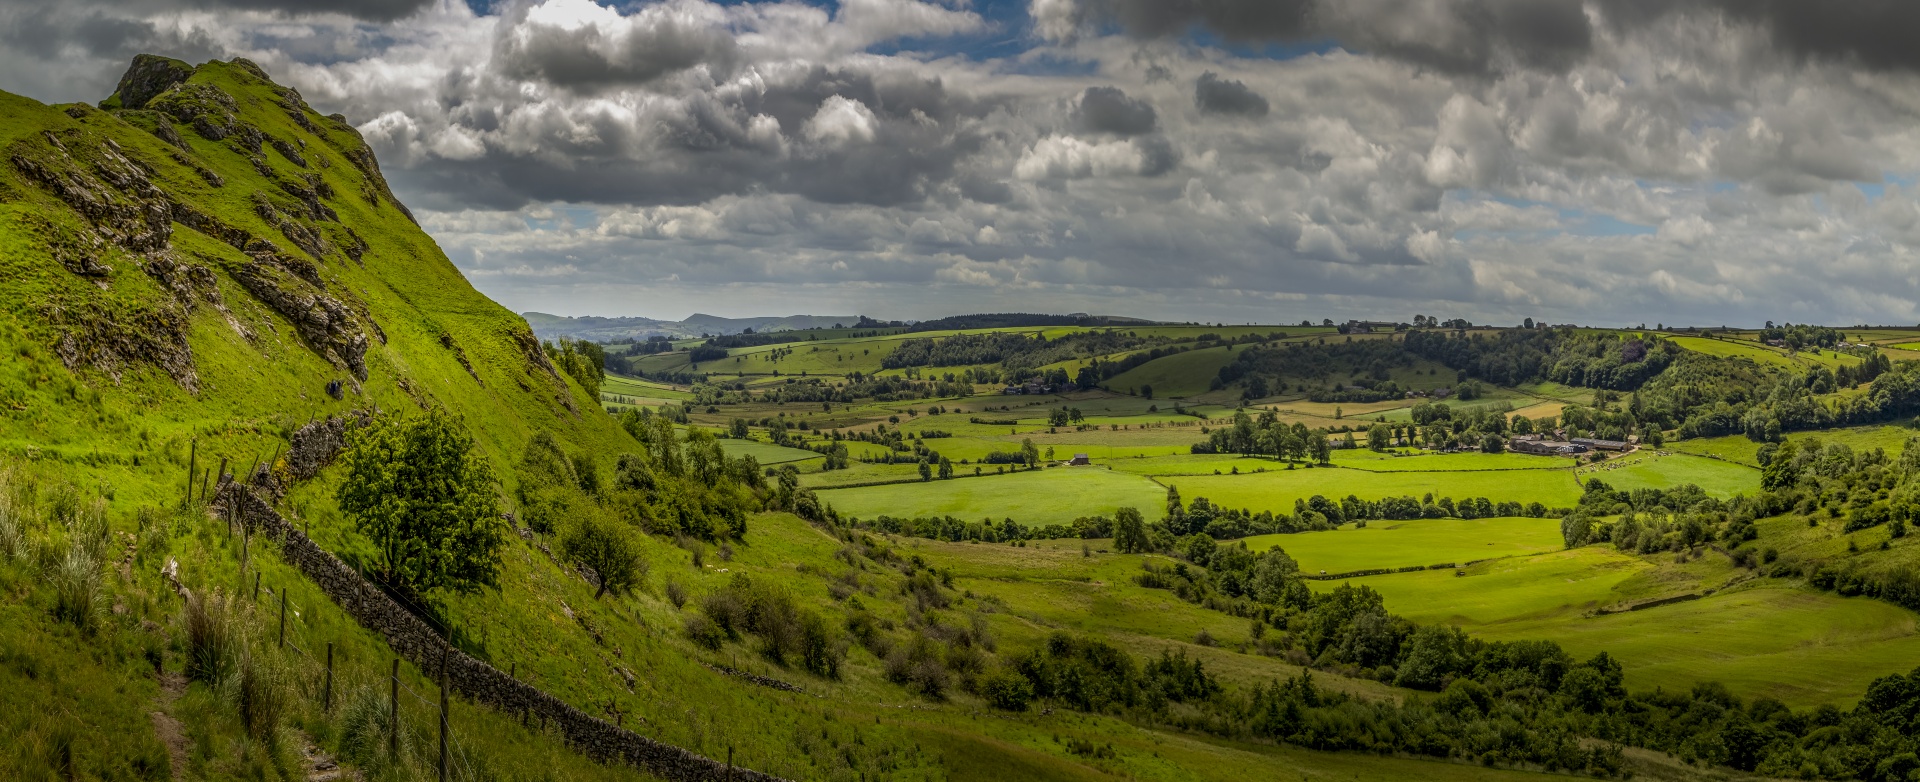 Peak District is an upland area in England at the southern end of the Pennines. It is mostly in northern Derbyshire, but also includes parts of Cheshire, Greater Manchester, Staffordshire, West Yorkshire and South Yorkshire.